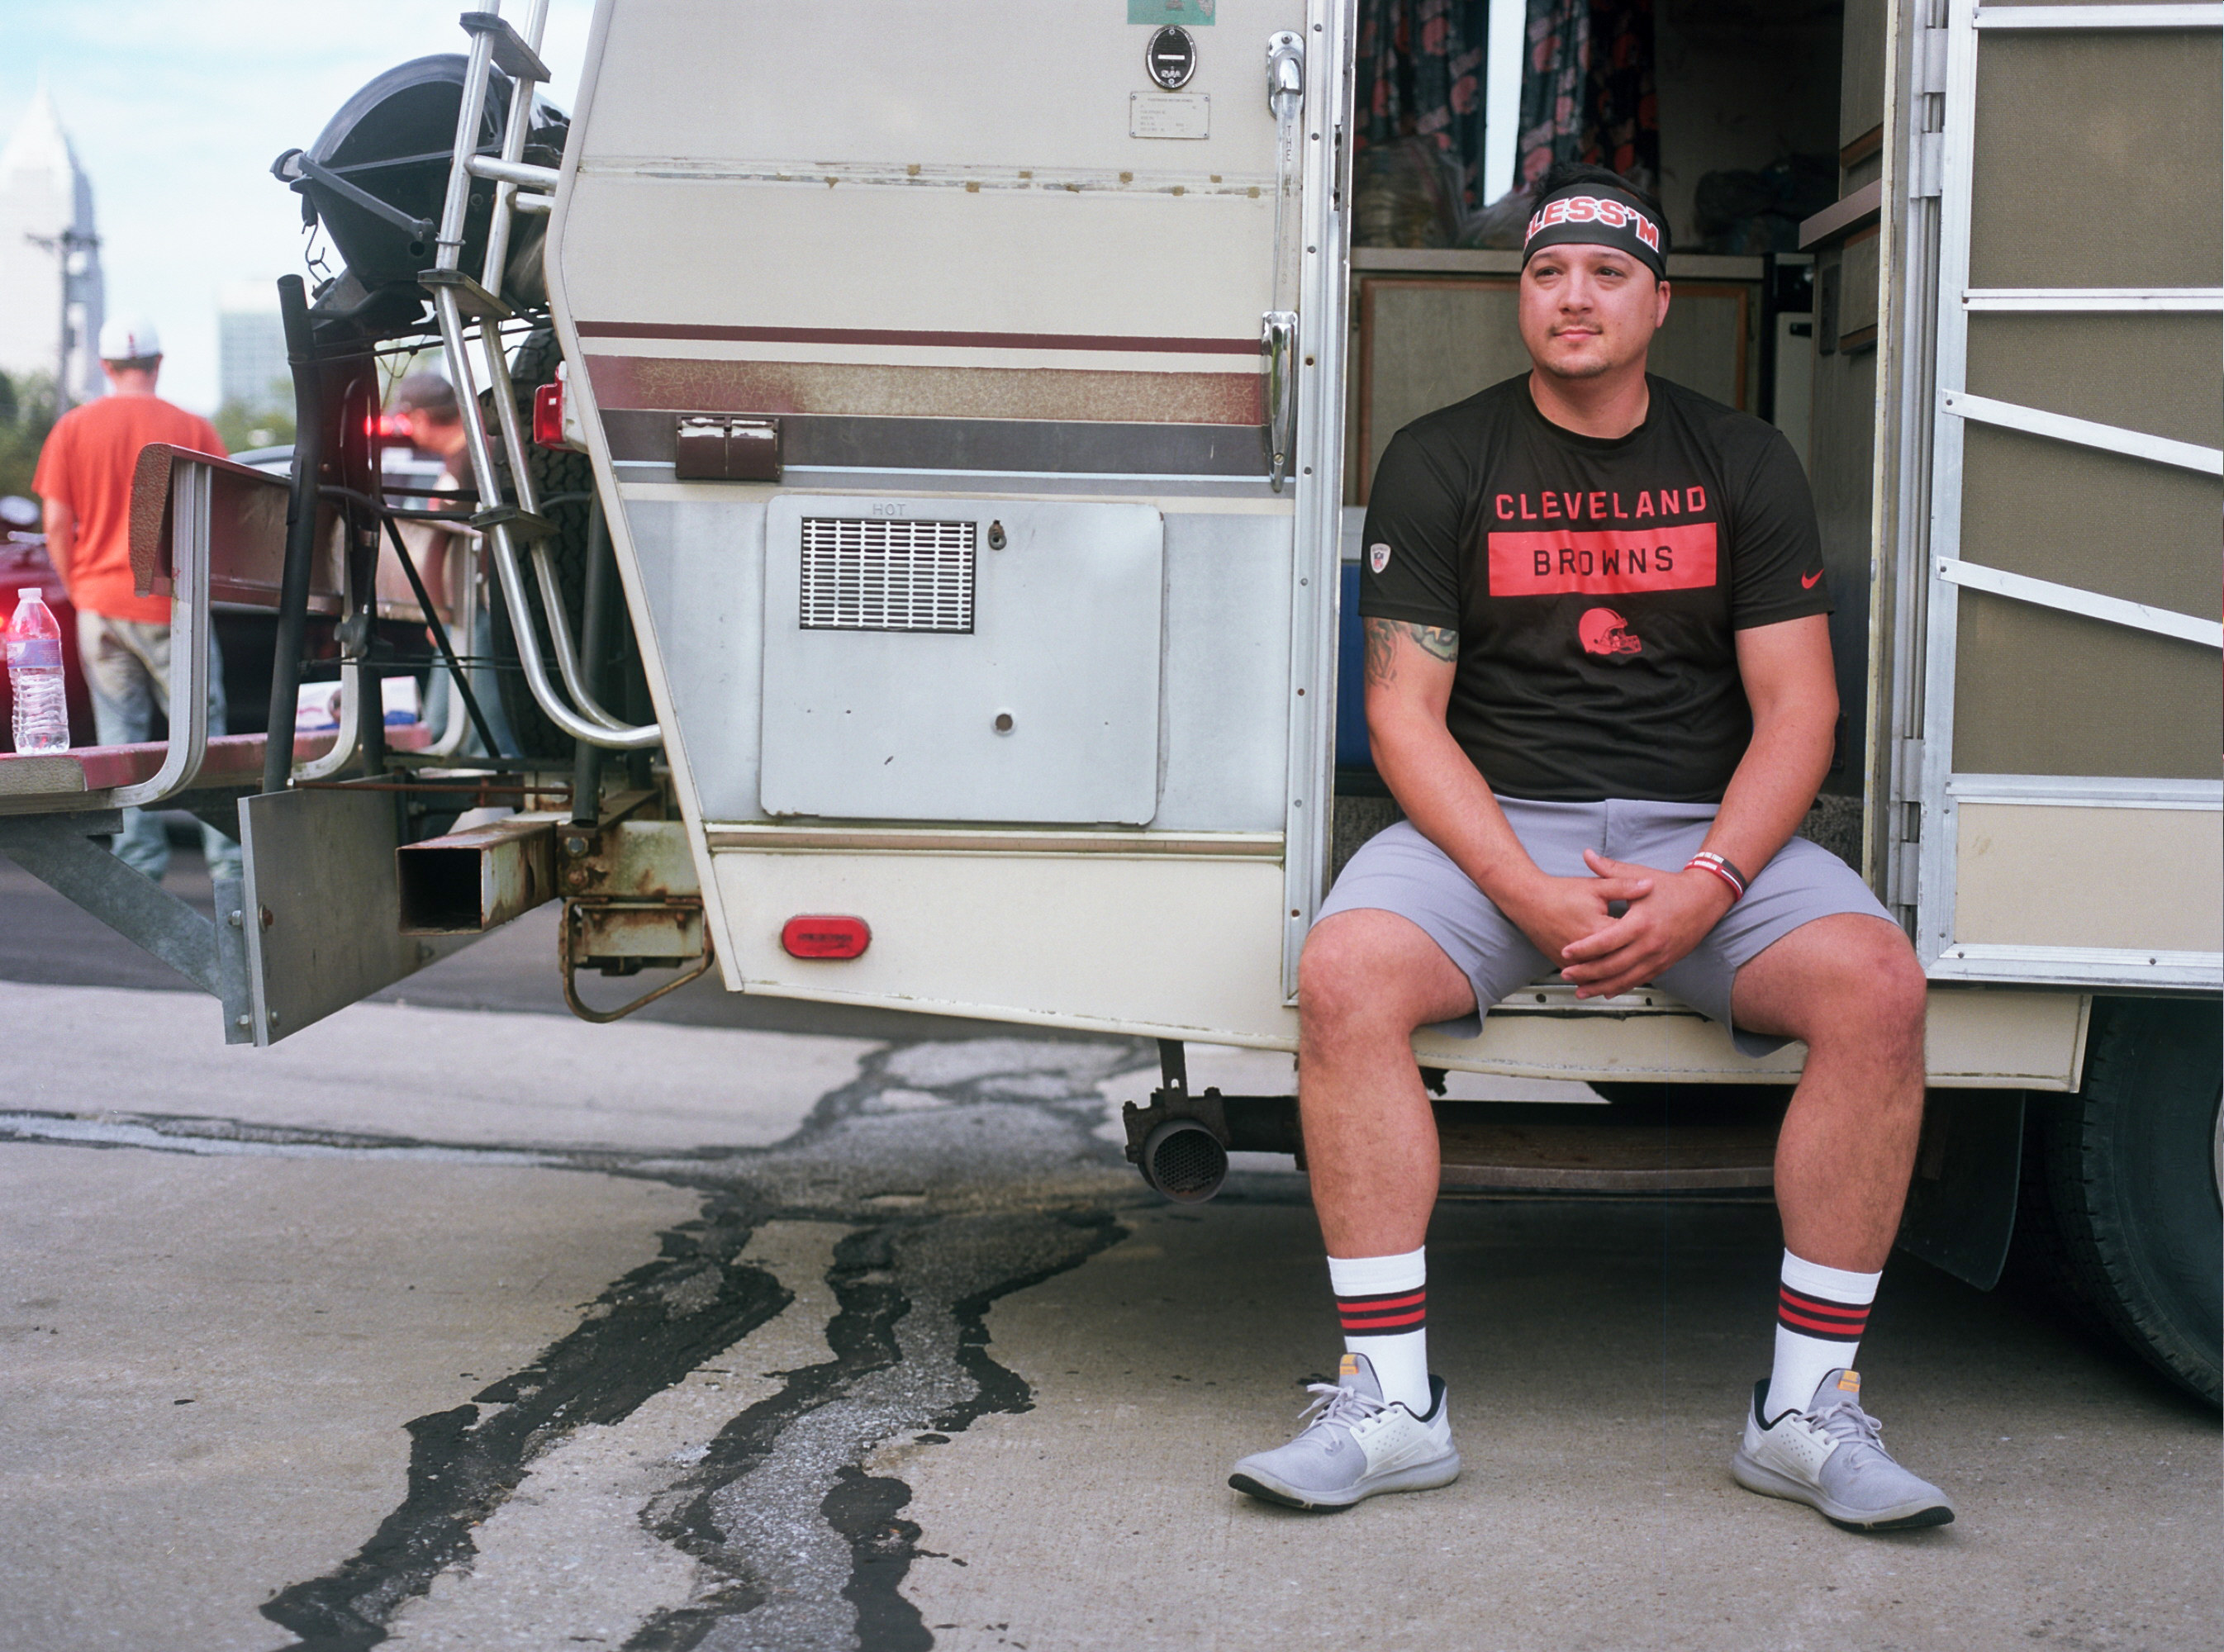 A man sits in a camper van with a Cleveland Browns T-shirt